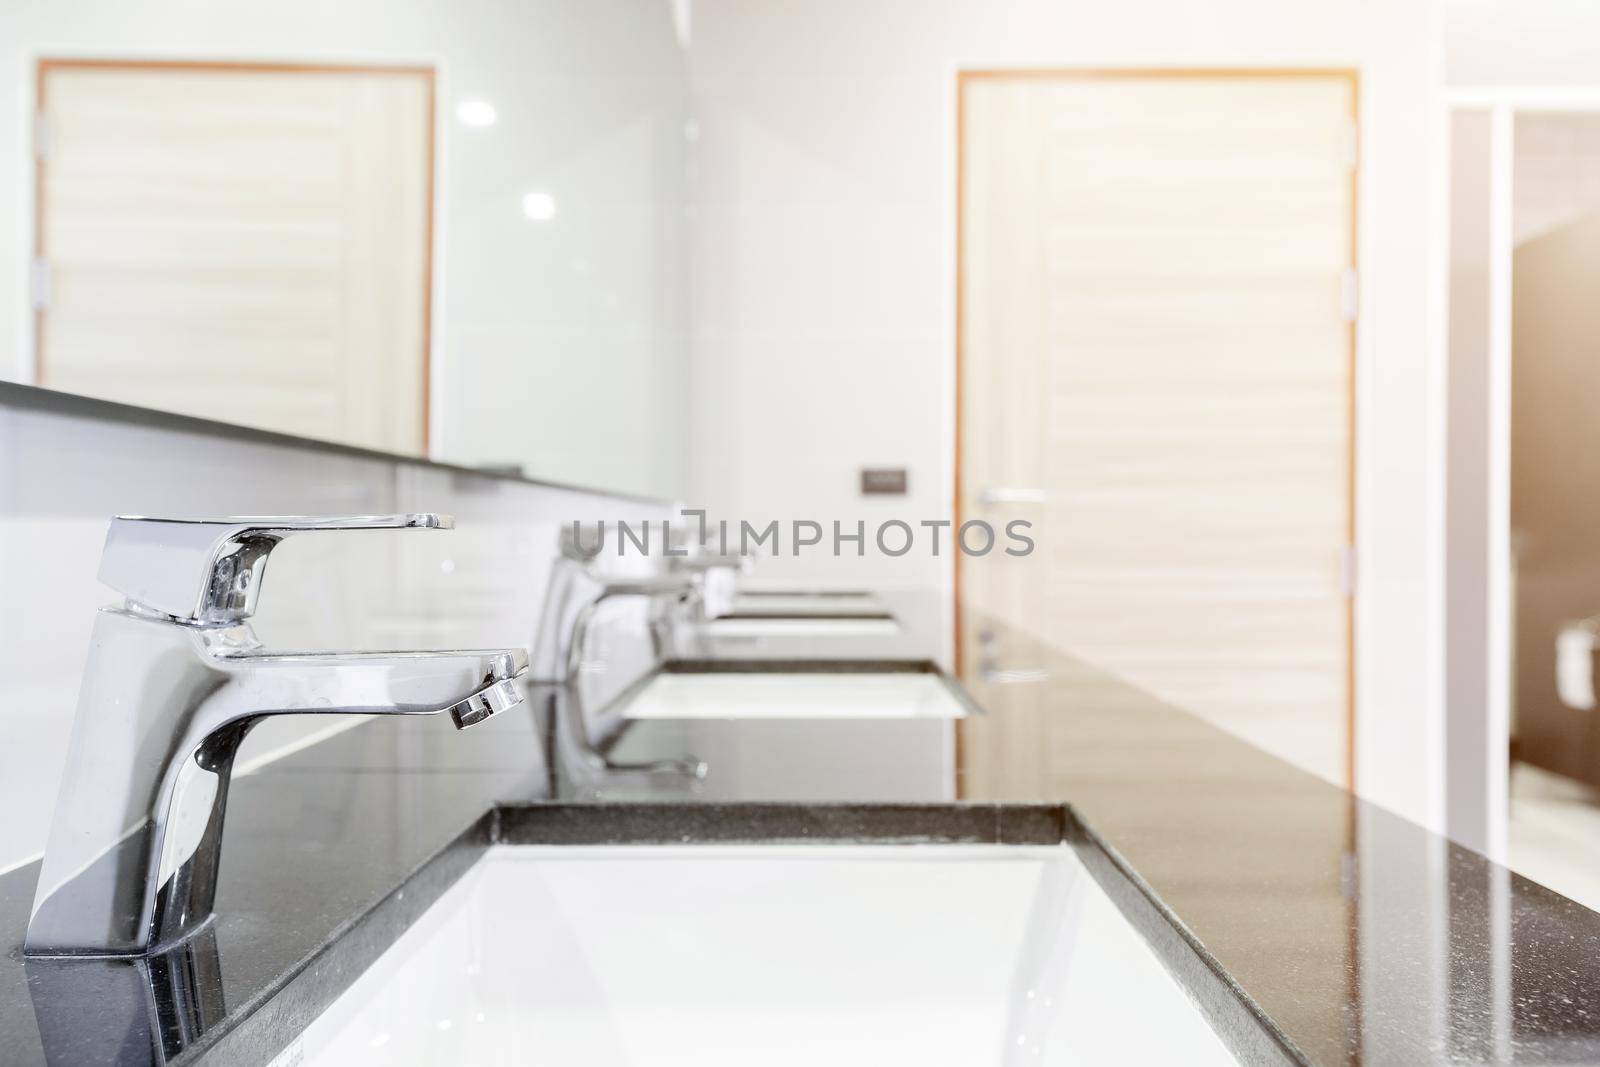 public Interior of bathroom with sink basin faucet lined up Modern design.